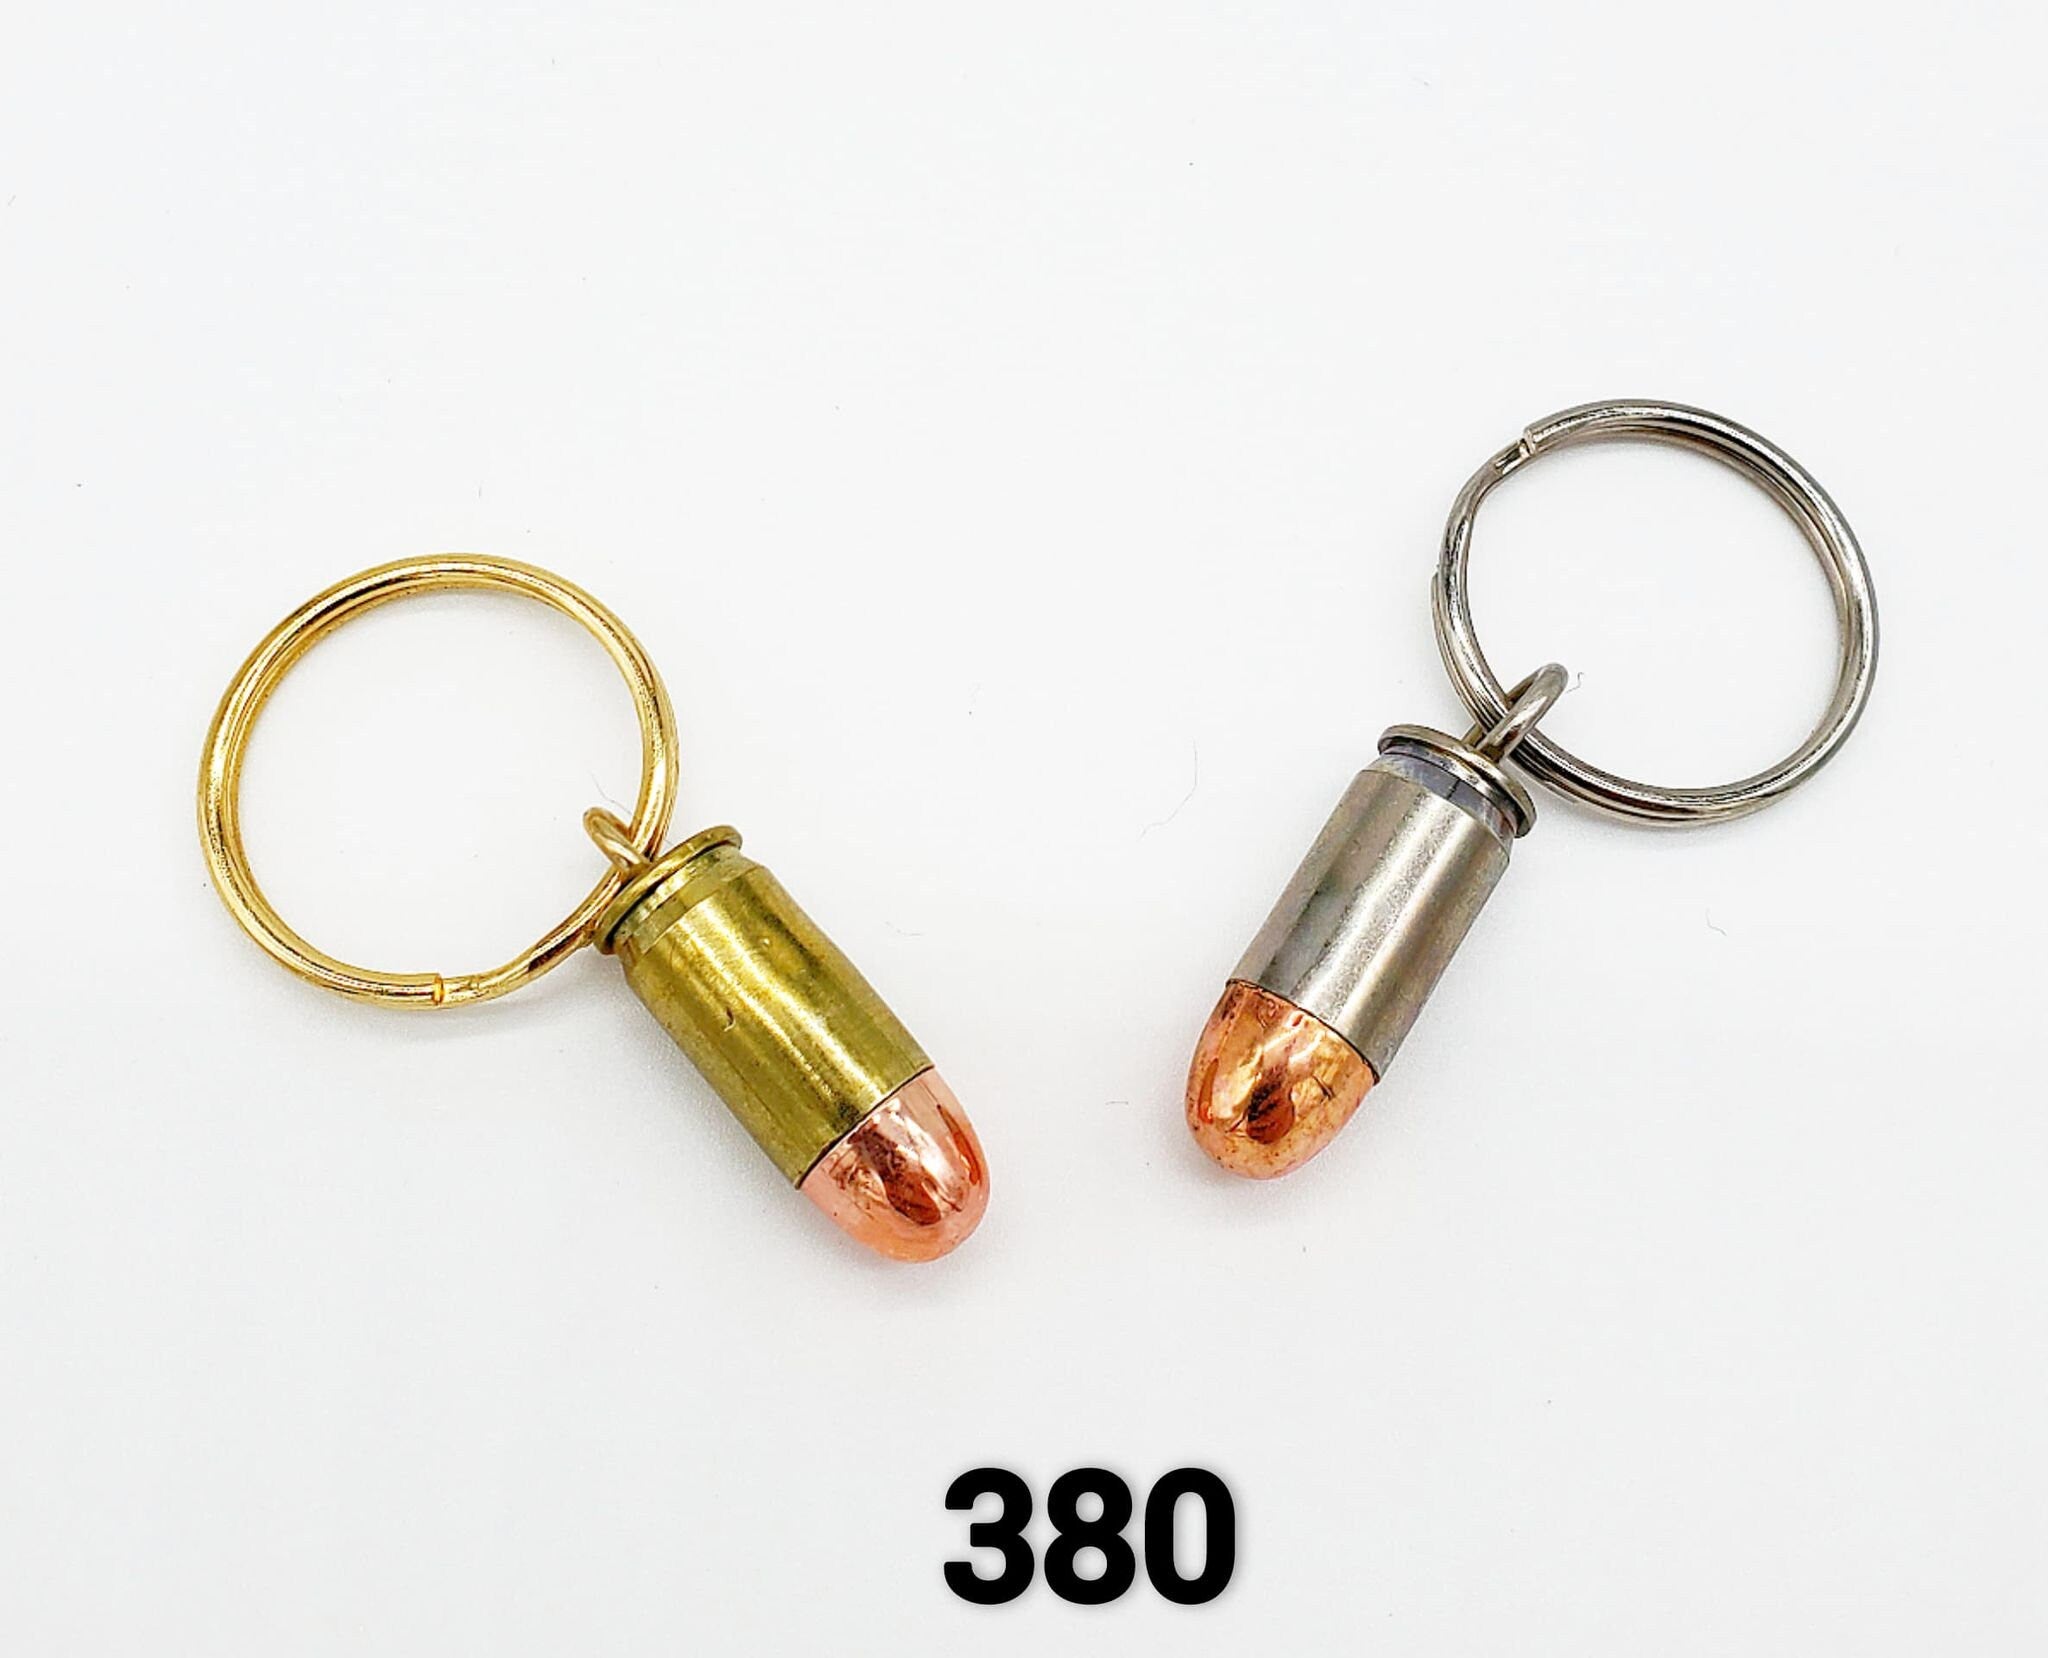 AMMUNITION 30-06 KNIFE KEY RING - Wicked Store